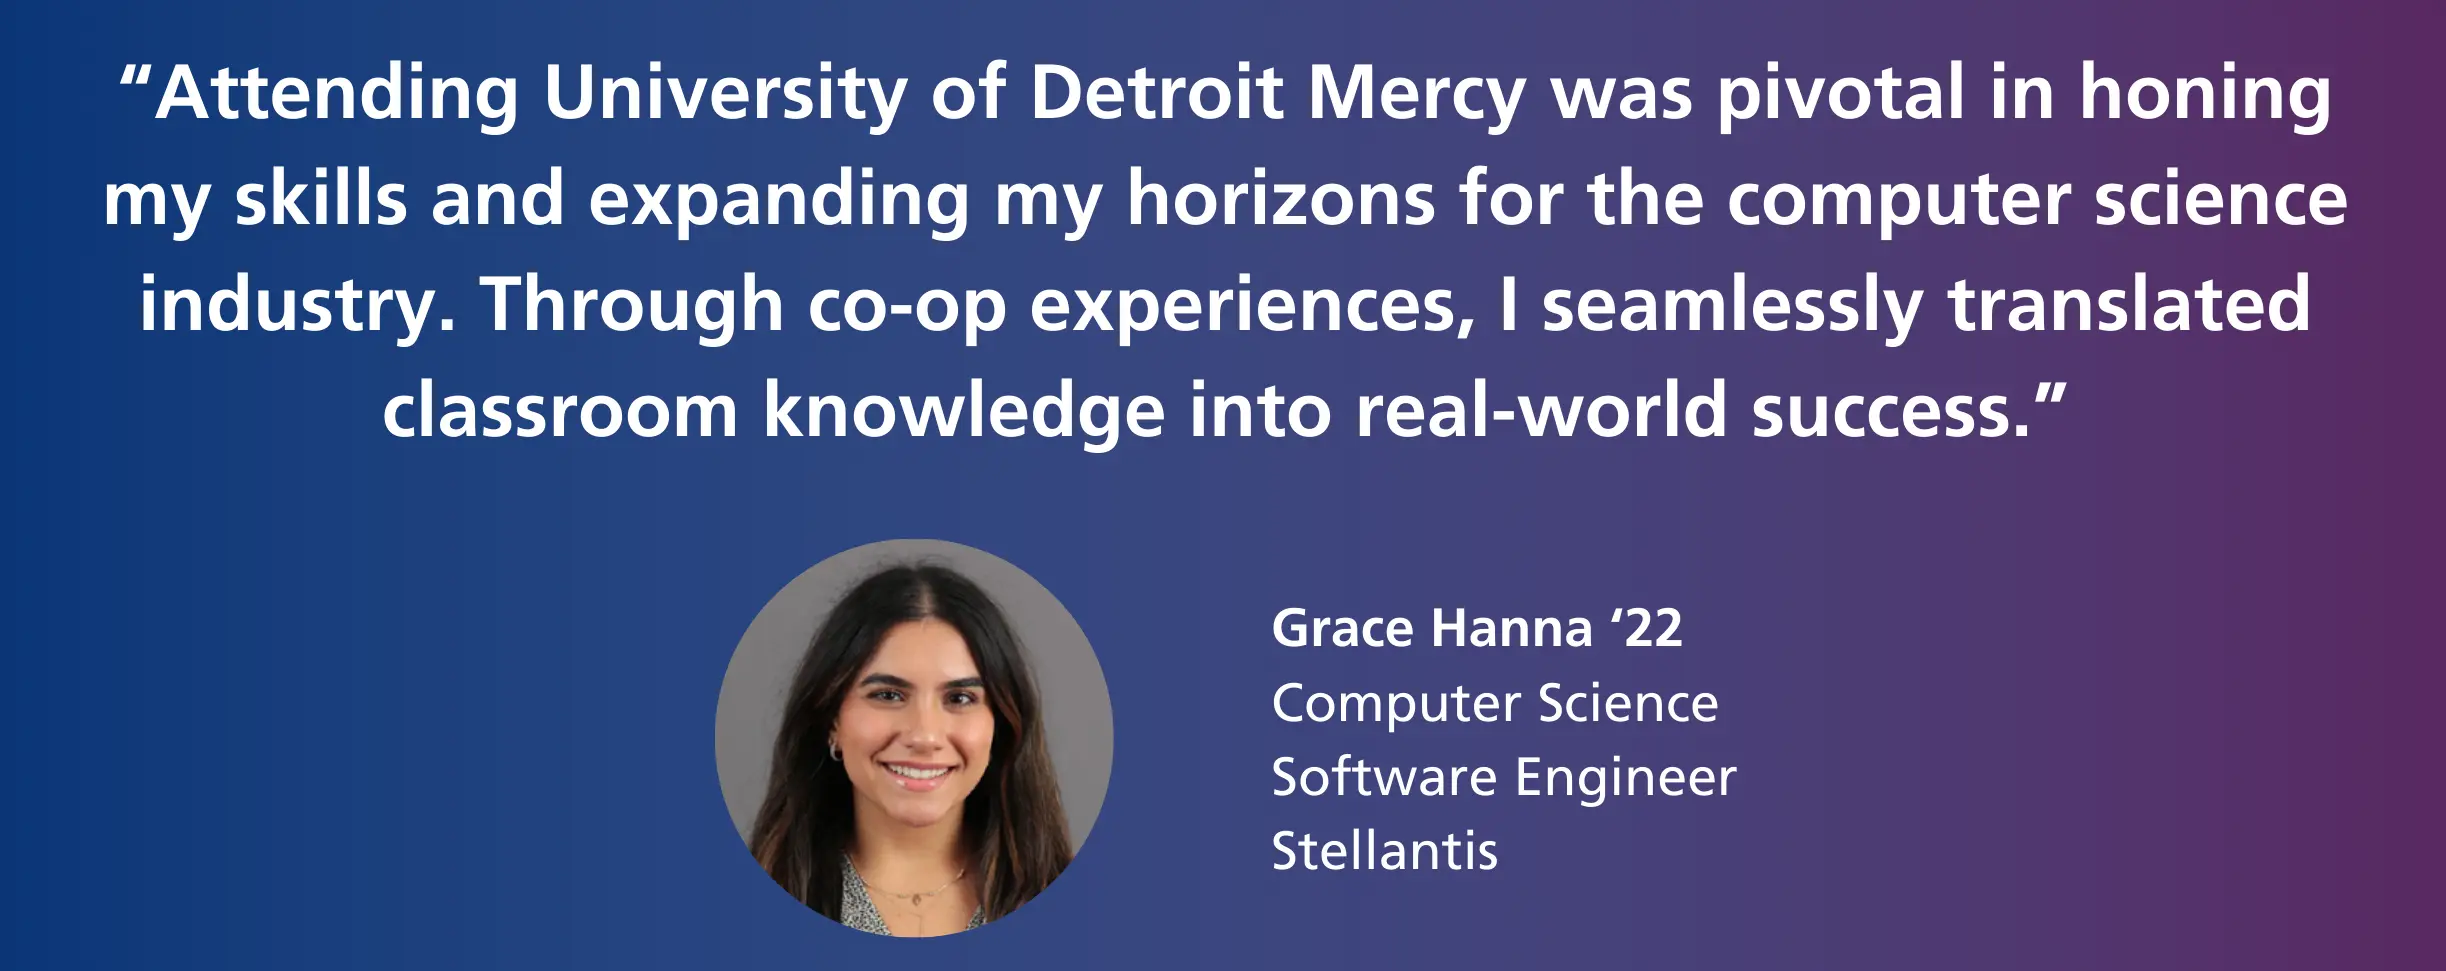 "Attending University of Detroit Mercy was pivotal in honing my skills and expanding my horizons for the computer science industry. Through co-op experiences, I seamlessly translated classroom knowledge into real-world success." - Grace Hanna '22